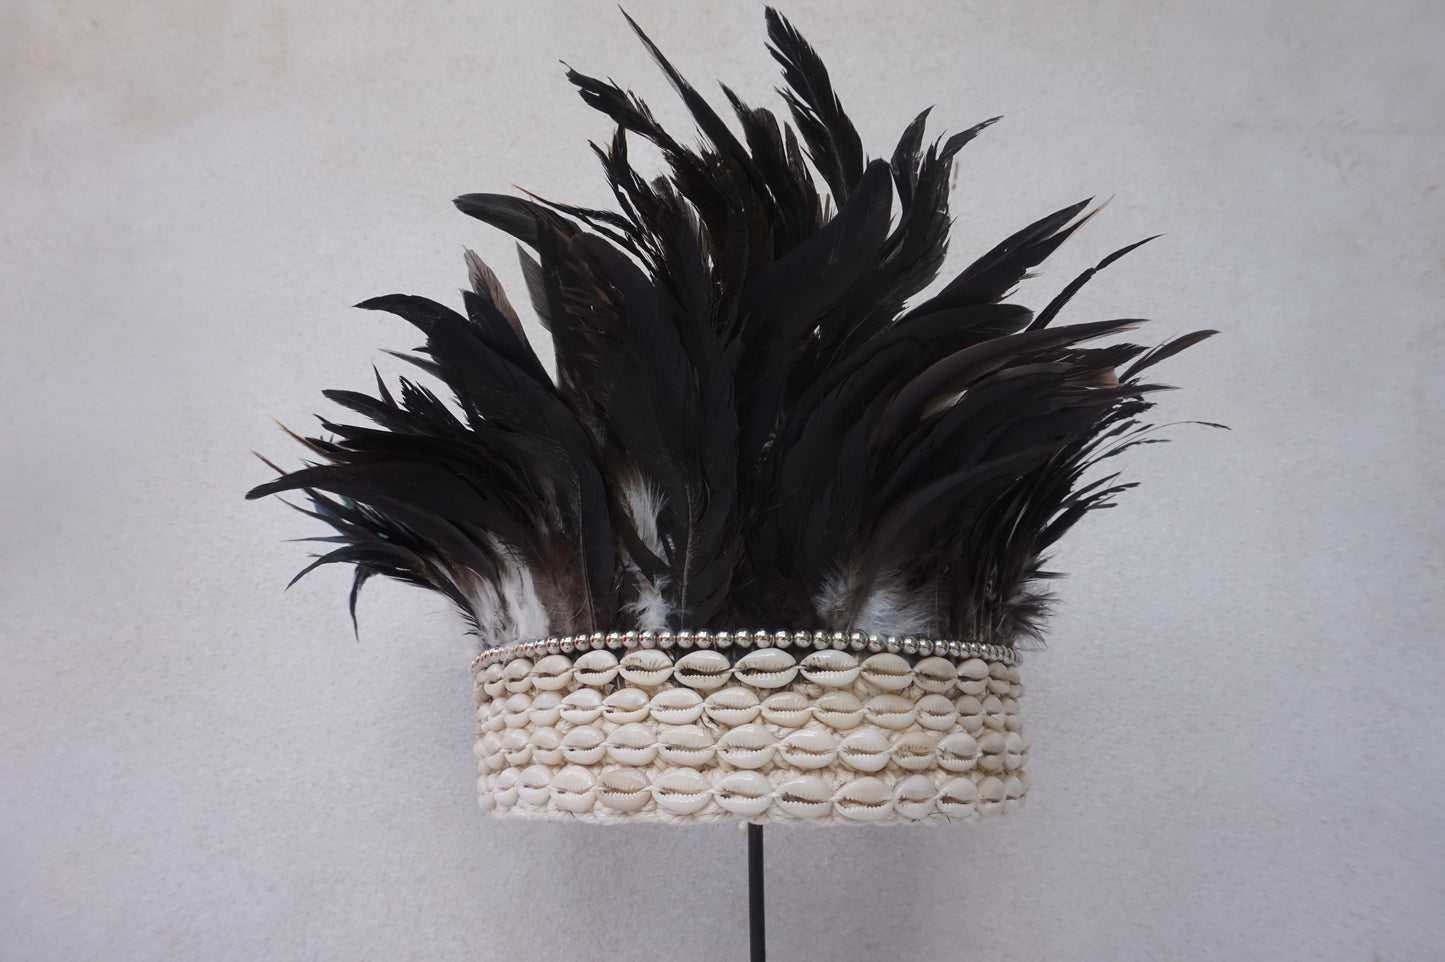 Feather Crown Black